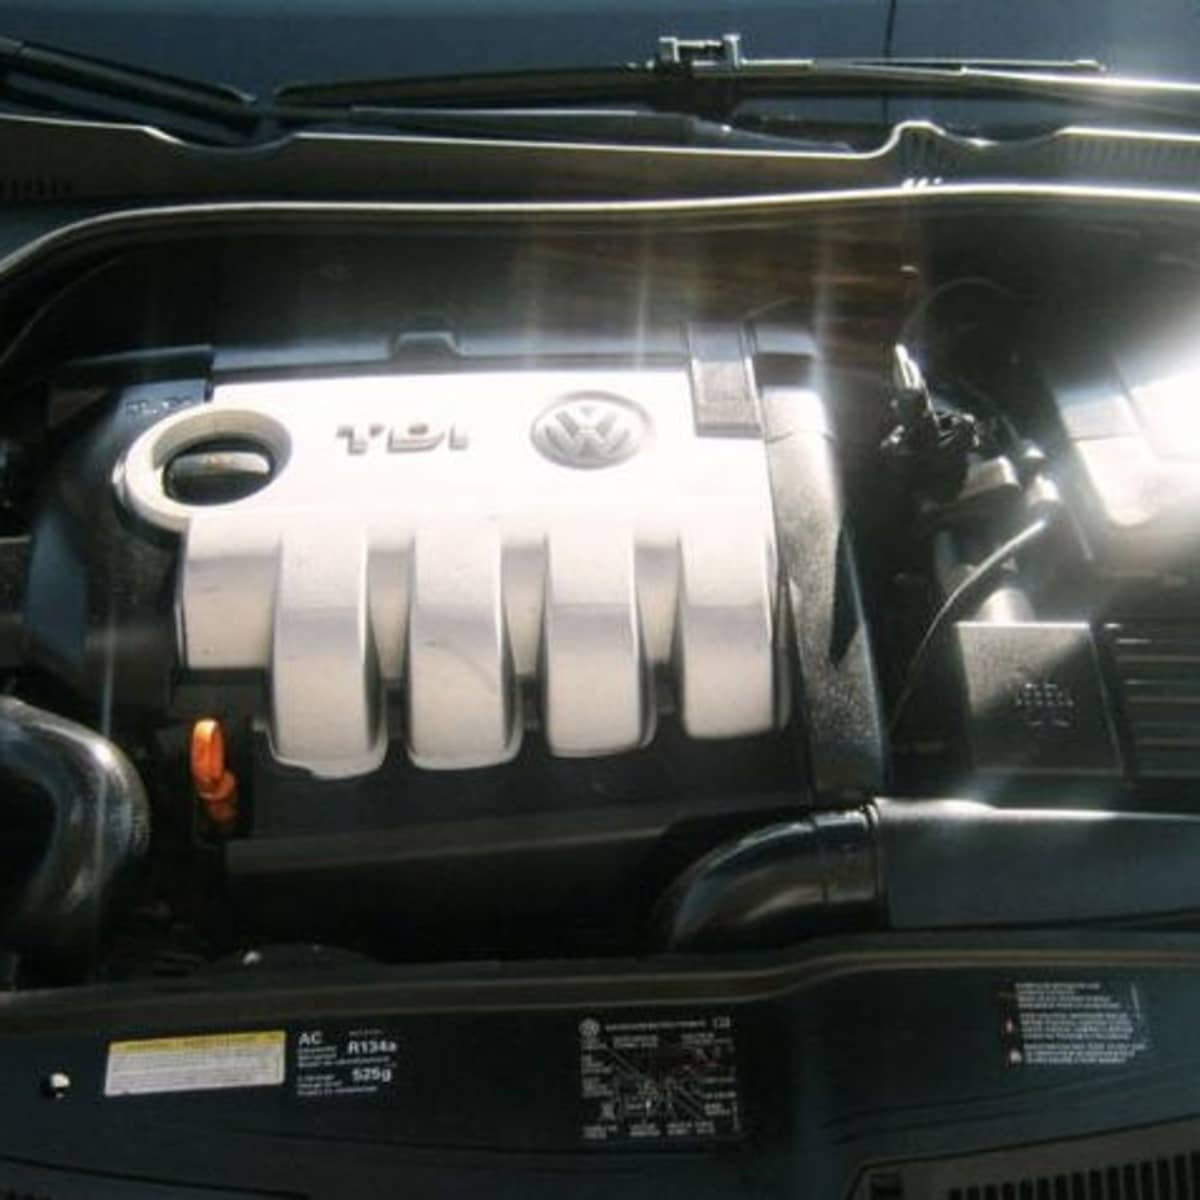 Can You Let A Vw Golf V5 Mk4 Idle From Starting the Engine Does Your Vw Tdi Diesel Engine Hiccup or Hesitate when … Of Can You Let A Vw Golf V5 Mk4 Idle From Starting the Engine